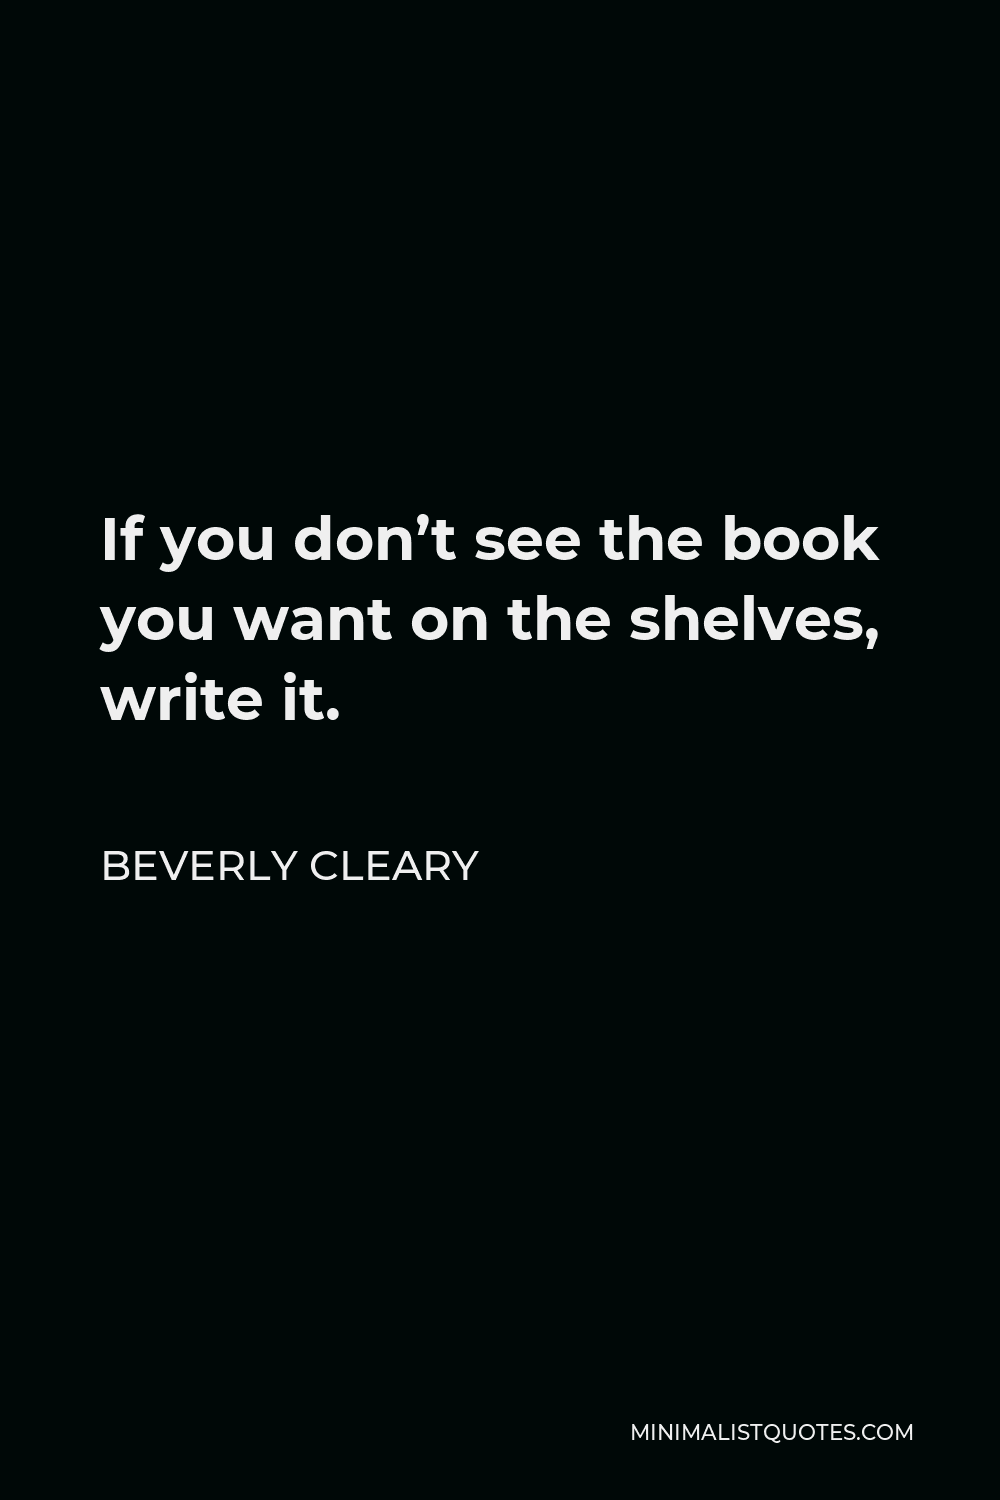 Beverly Cleary Quote - If you don’t see the book you want on the shelves, write it.